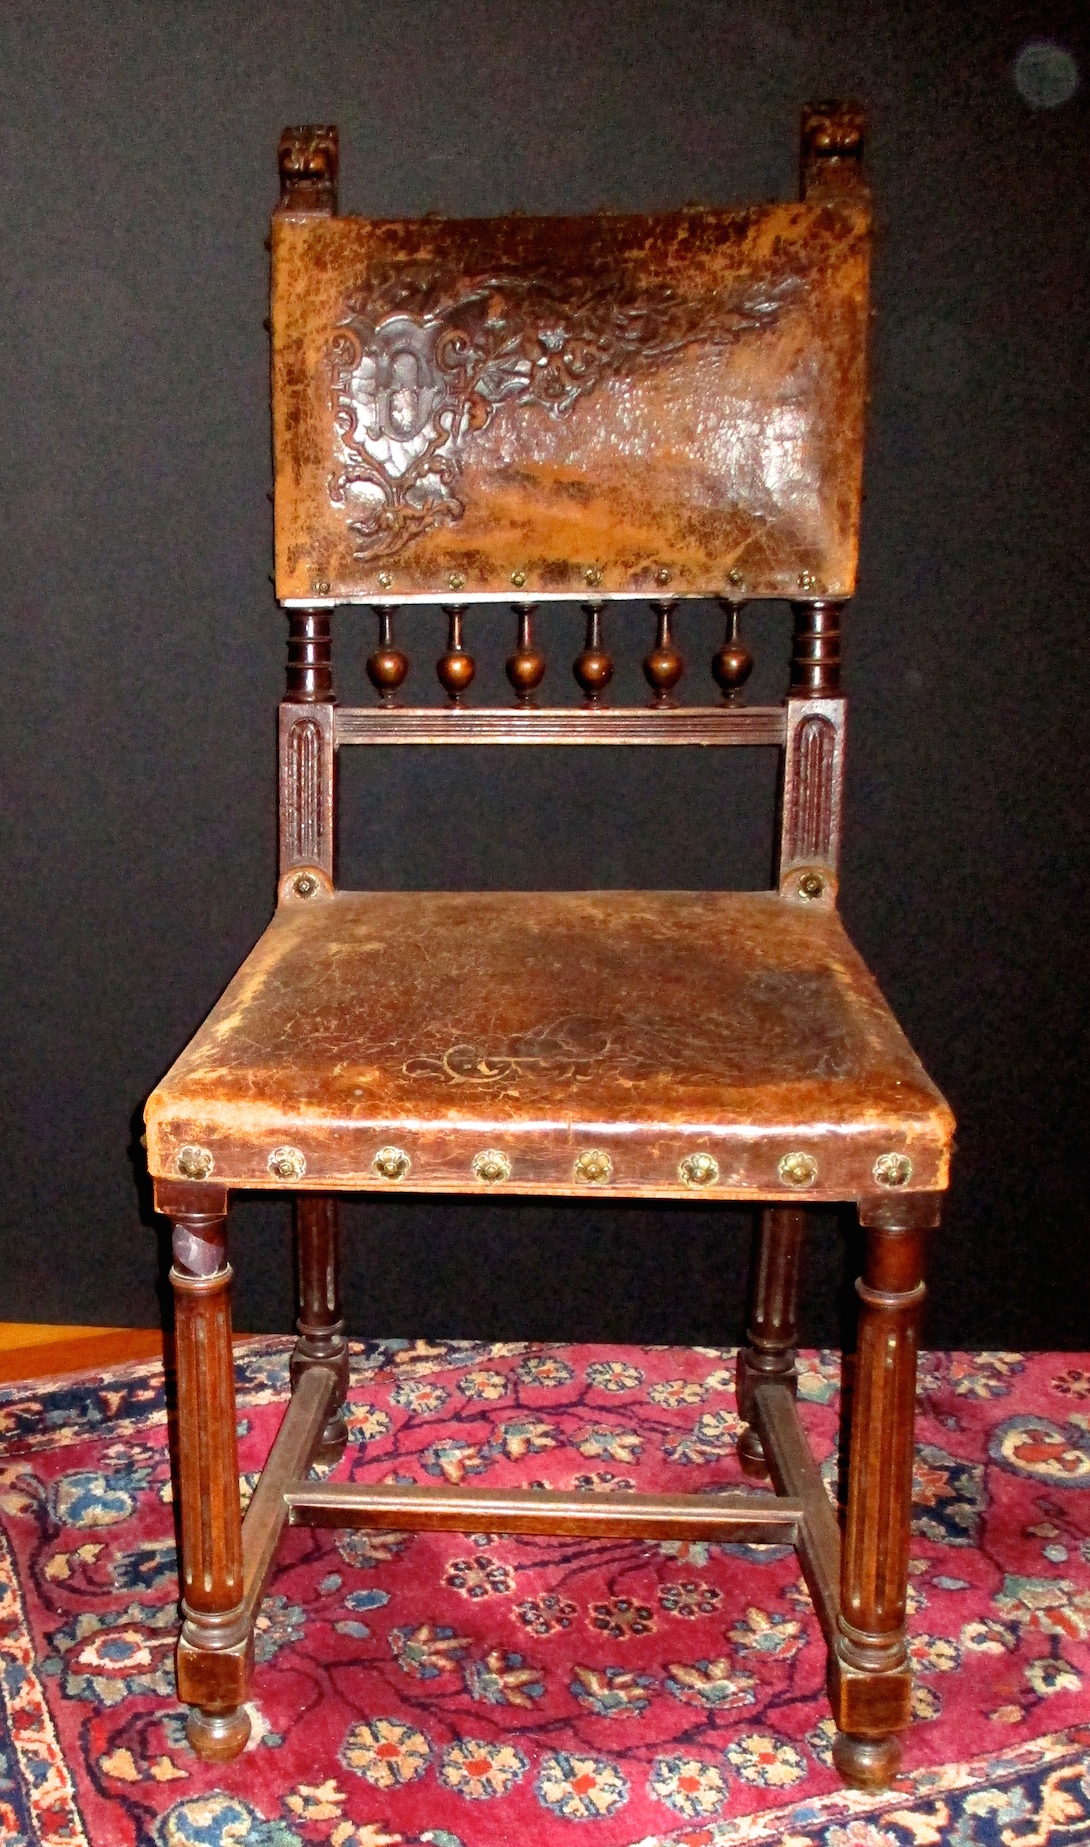 One of a Pair of Worn Leather Upholstered Chairs (Back is Tooled Leather) - (17" W x 37 1/2" H x 16" D)